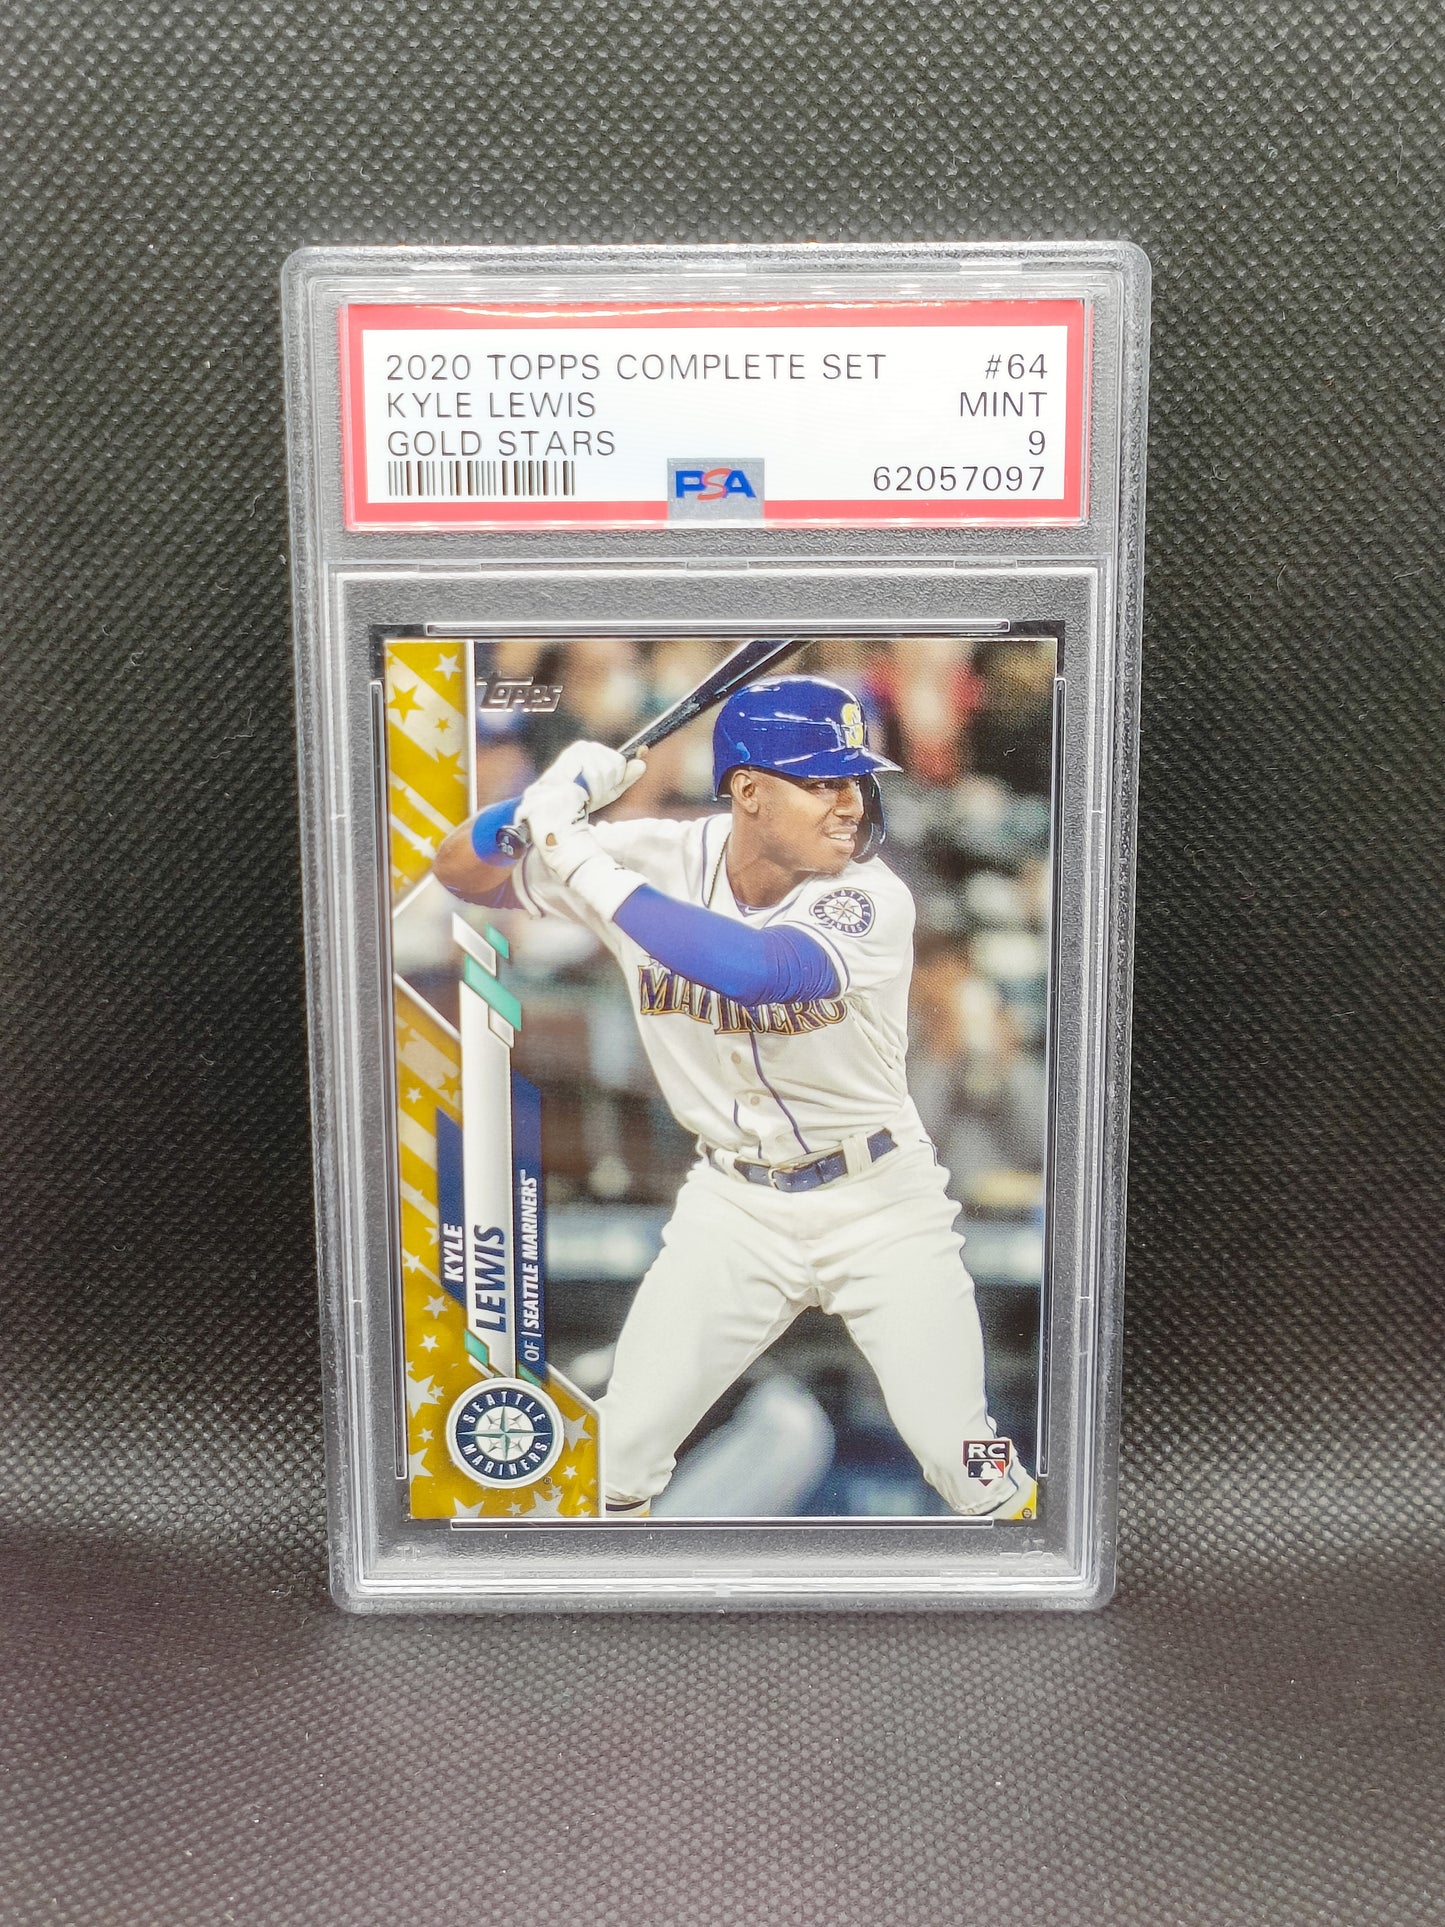 Kyle Lewis - 2020 Topps Complete Set Rookie Gold Stars - PSA 9 - Seattle Mariners